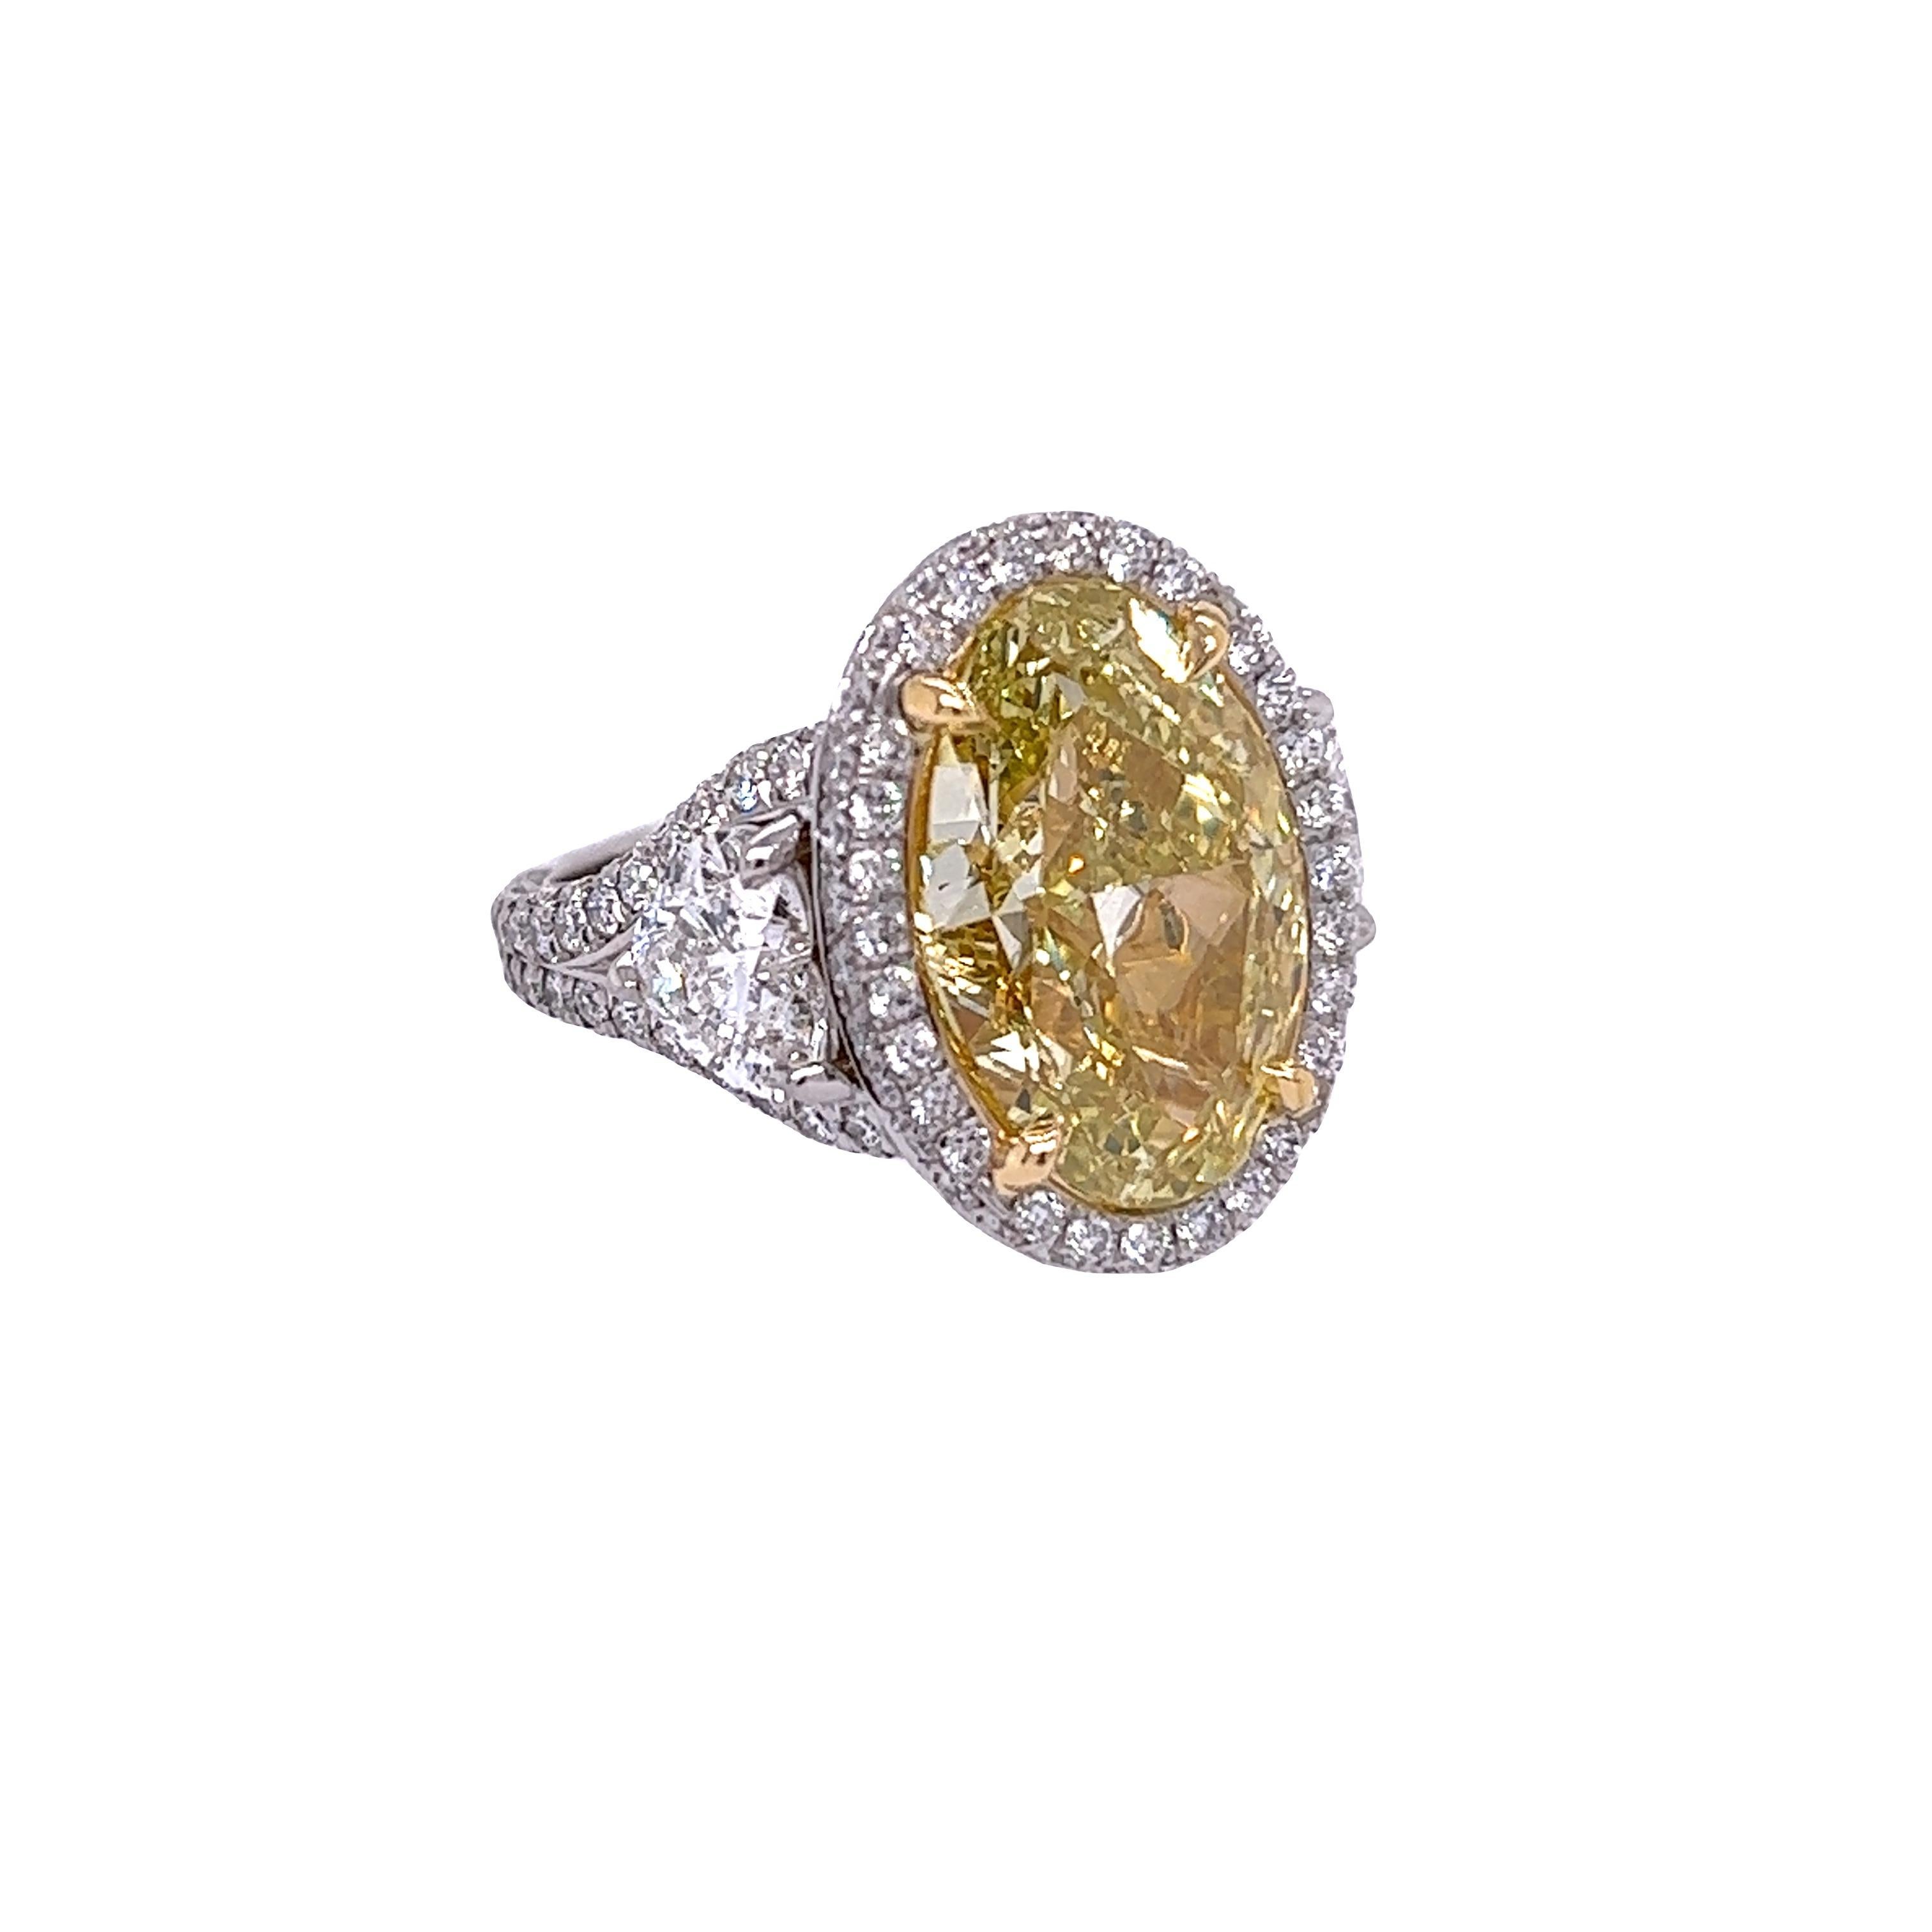 David Rosenberg 10.01 Ct Oval Fancy Yellow VS2 GIA Diamond Engagement Ring In New Condition For Sale In Boca Raton, FL